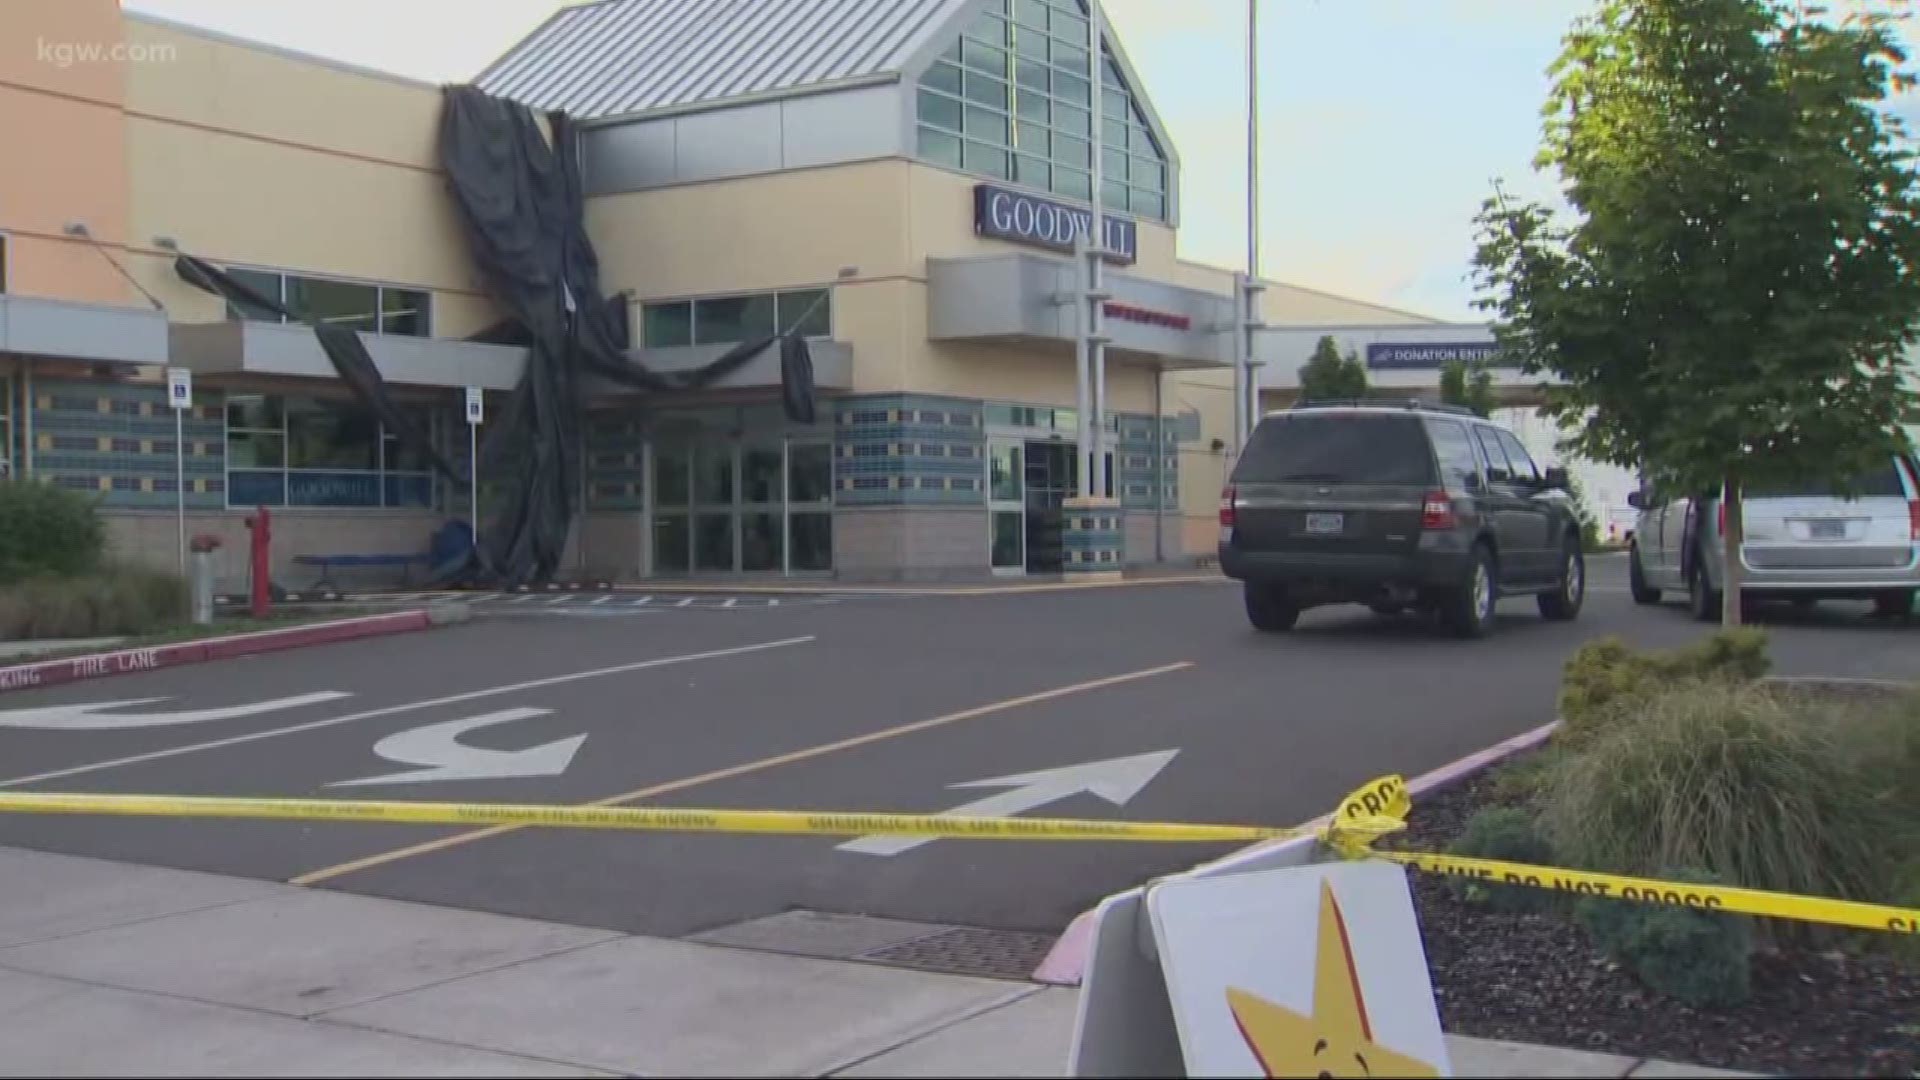 One person was killed in a Salem Goodwill store. Police said it was an officer-involved shooting.